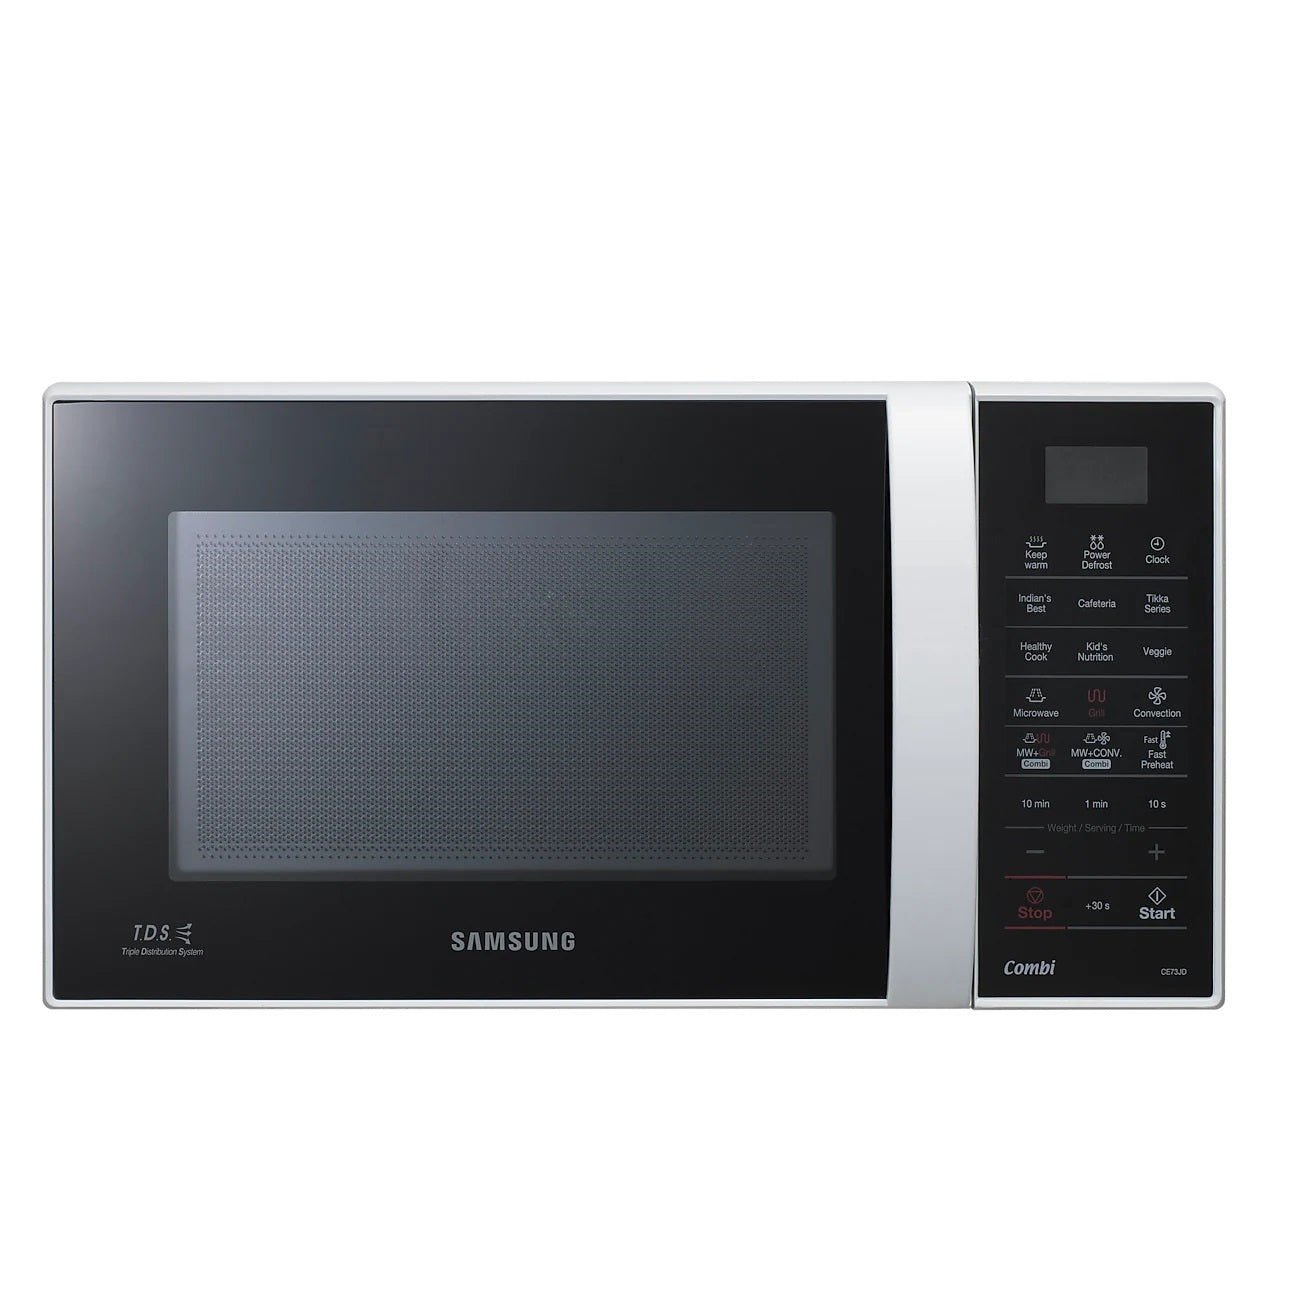 Samsung 21L CE73JD1 Convection Microwave Oven